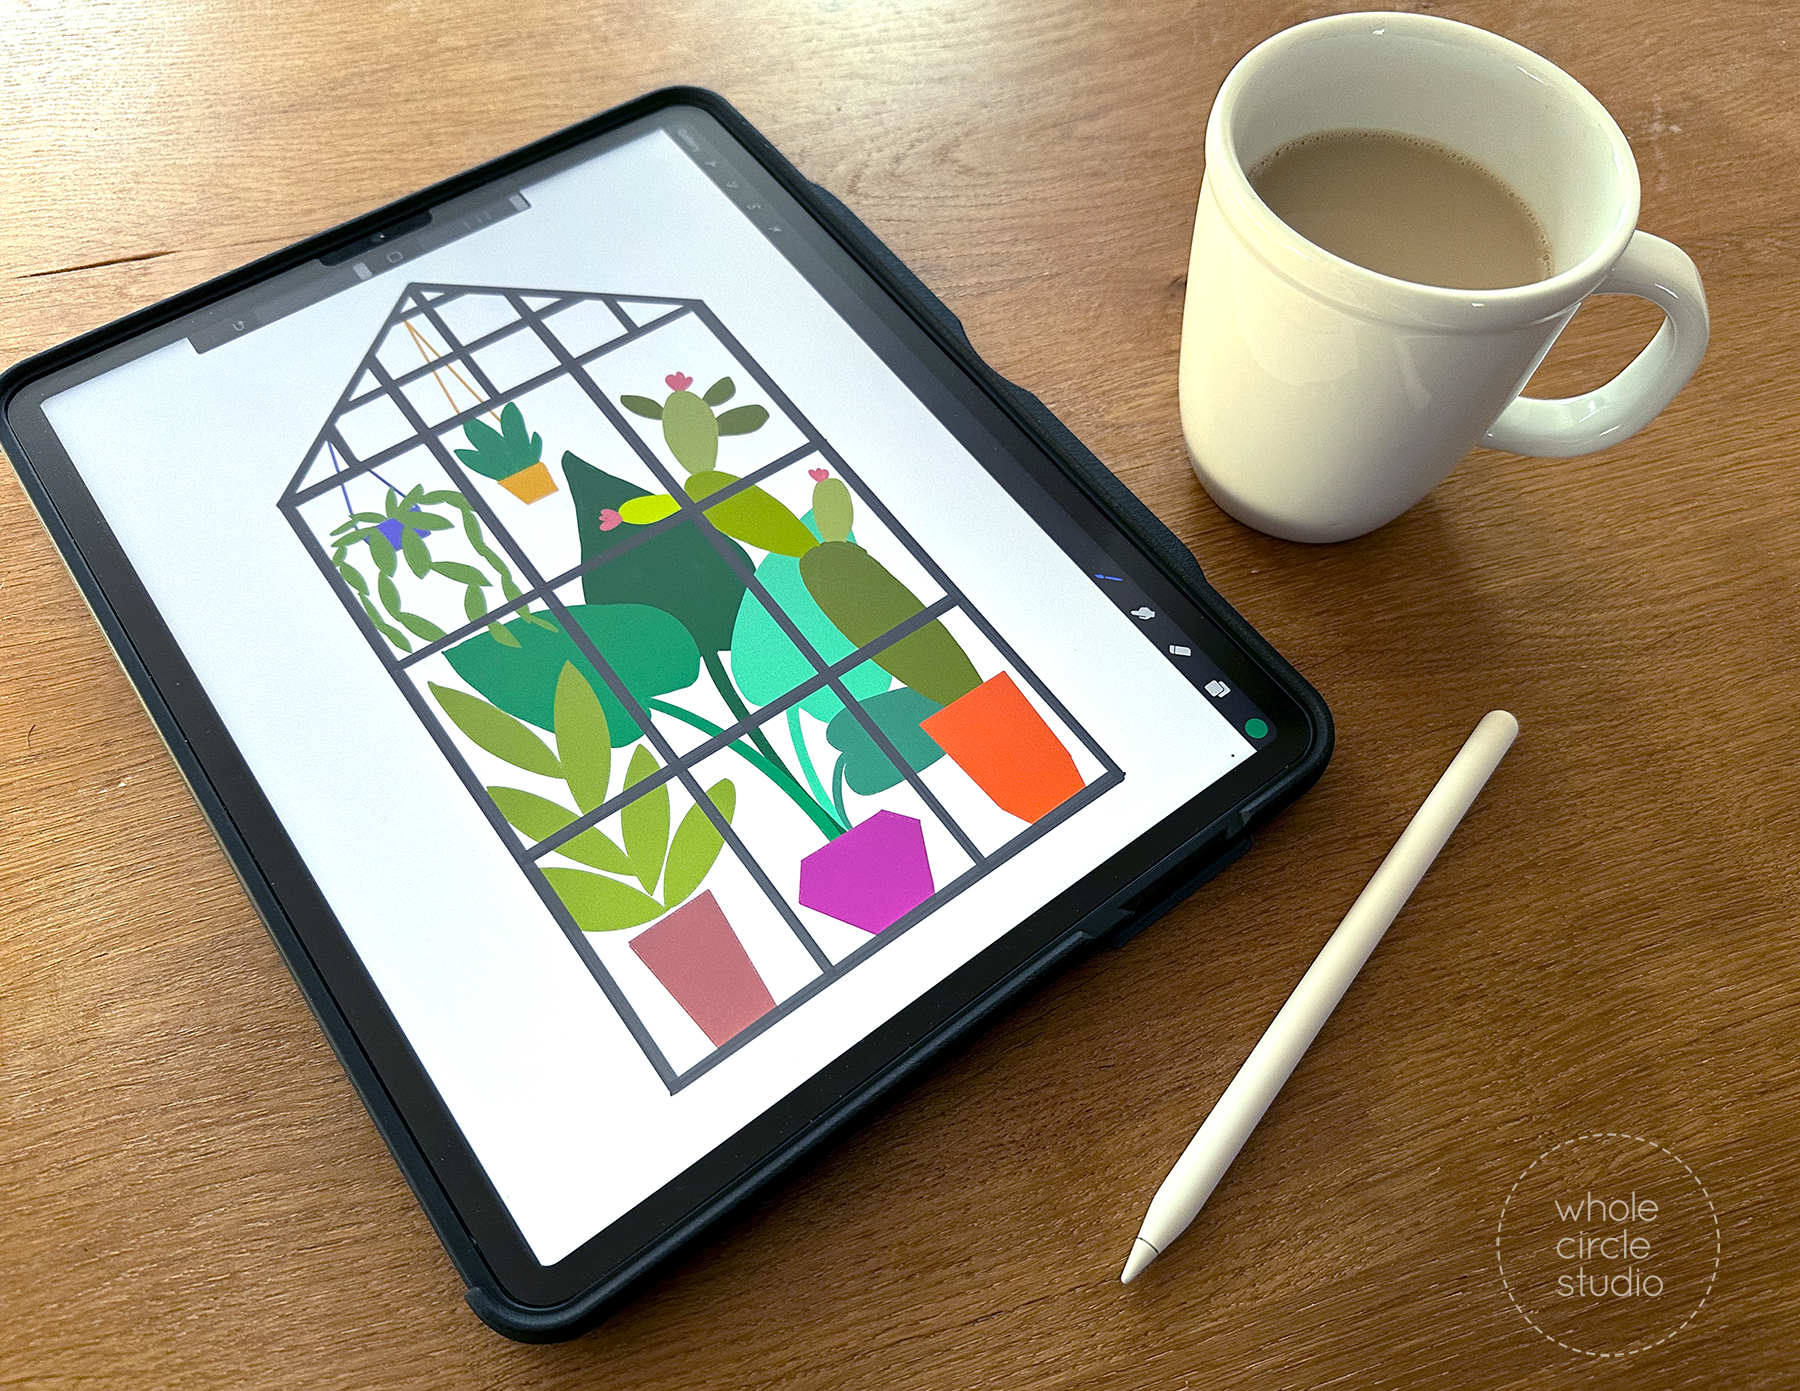 ipad with sketch of a greenhouse